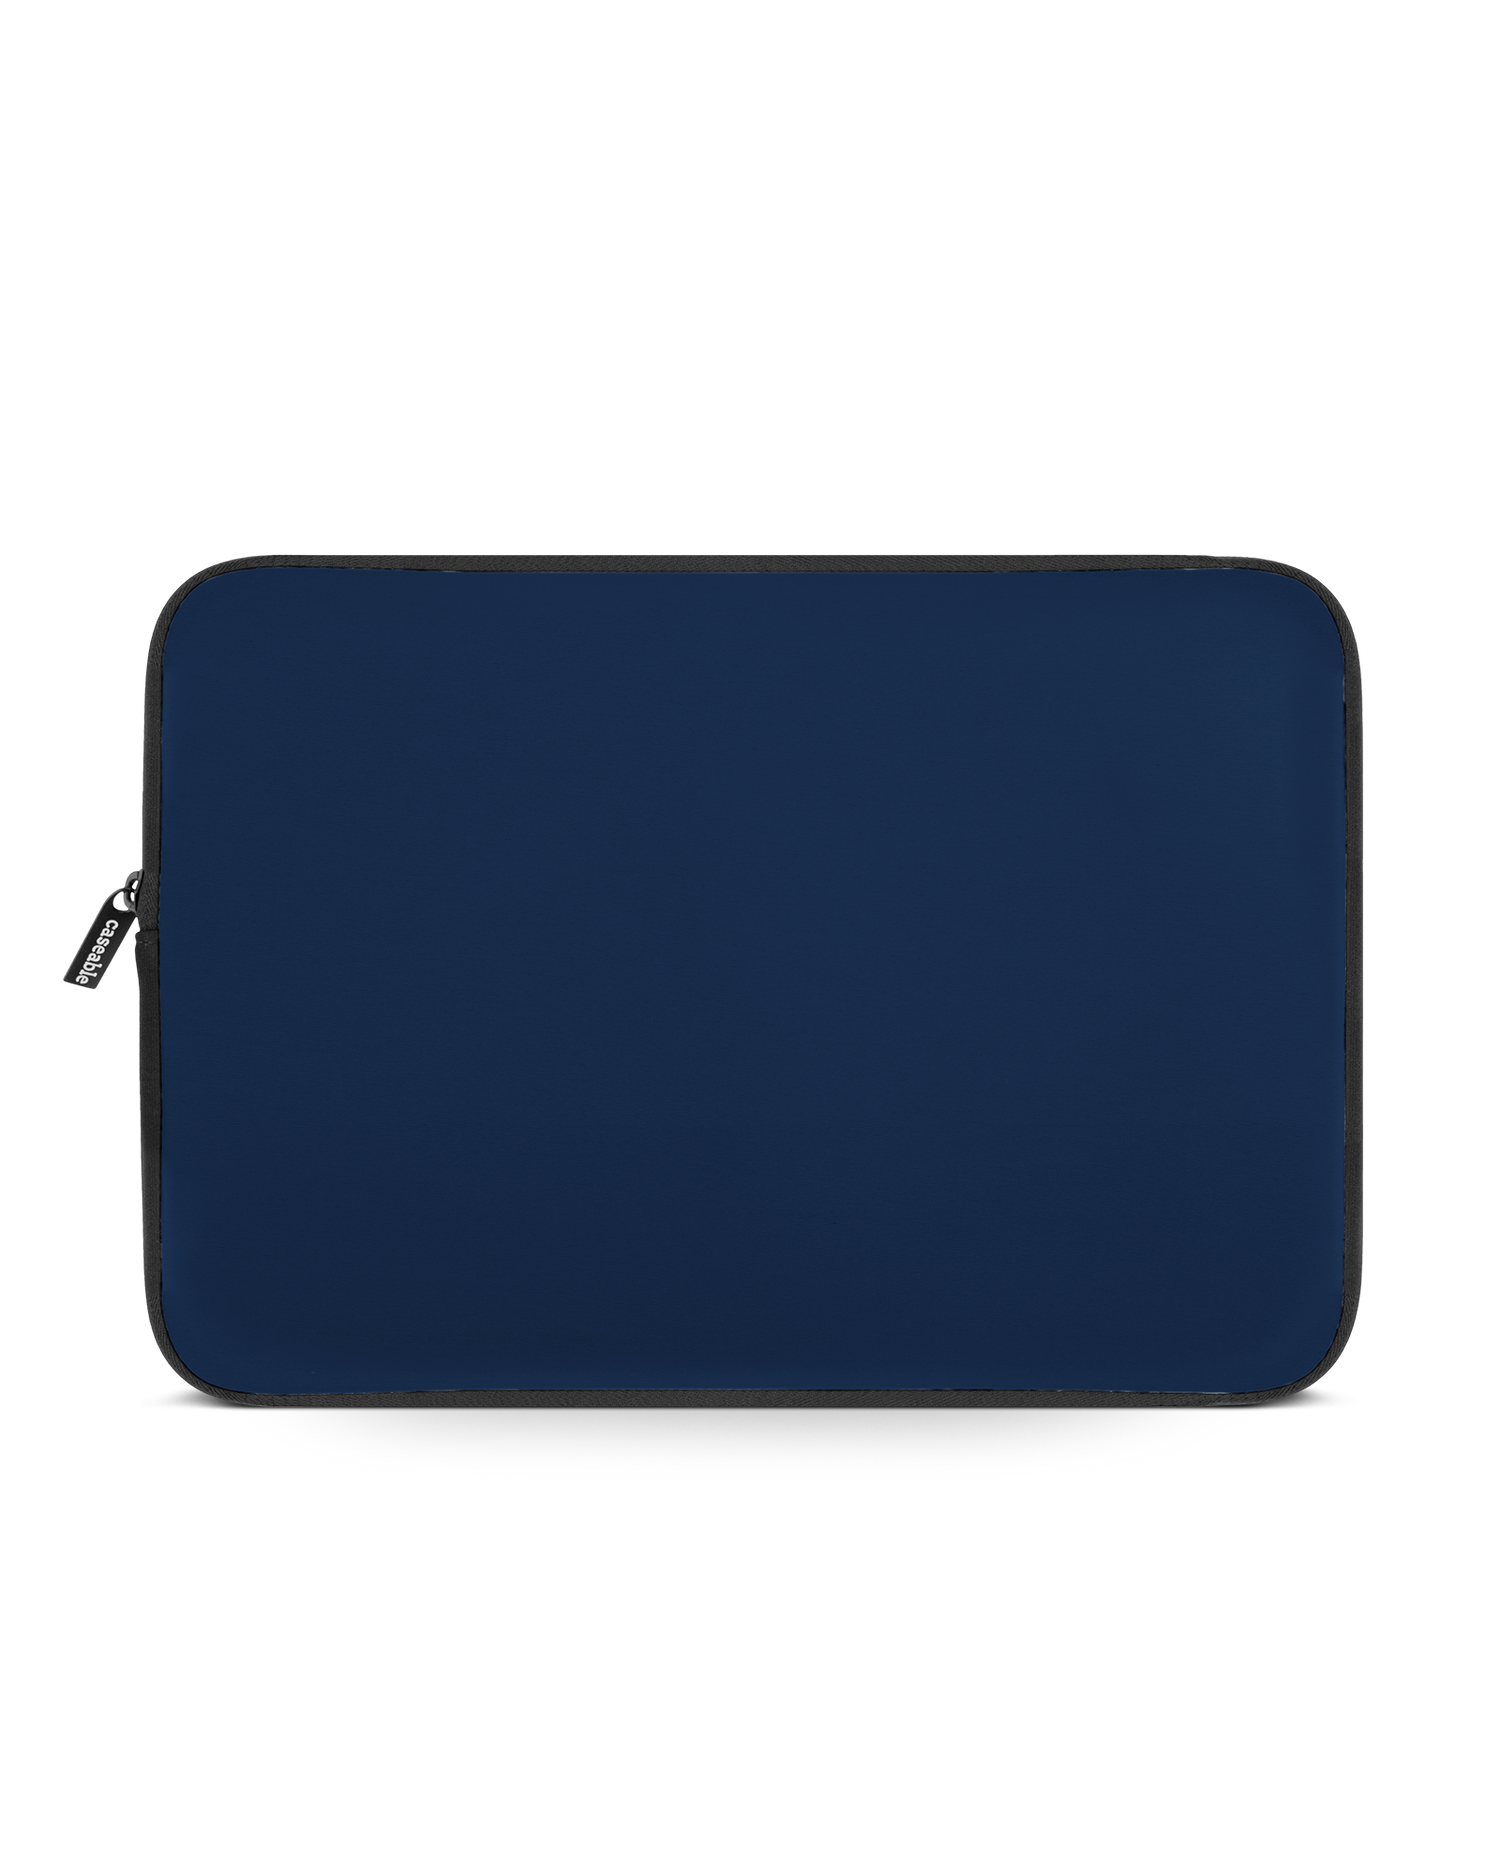 NAVY Laptop Case 14 inch: Front View